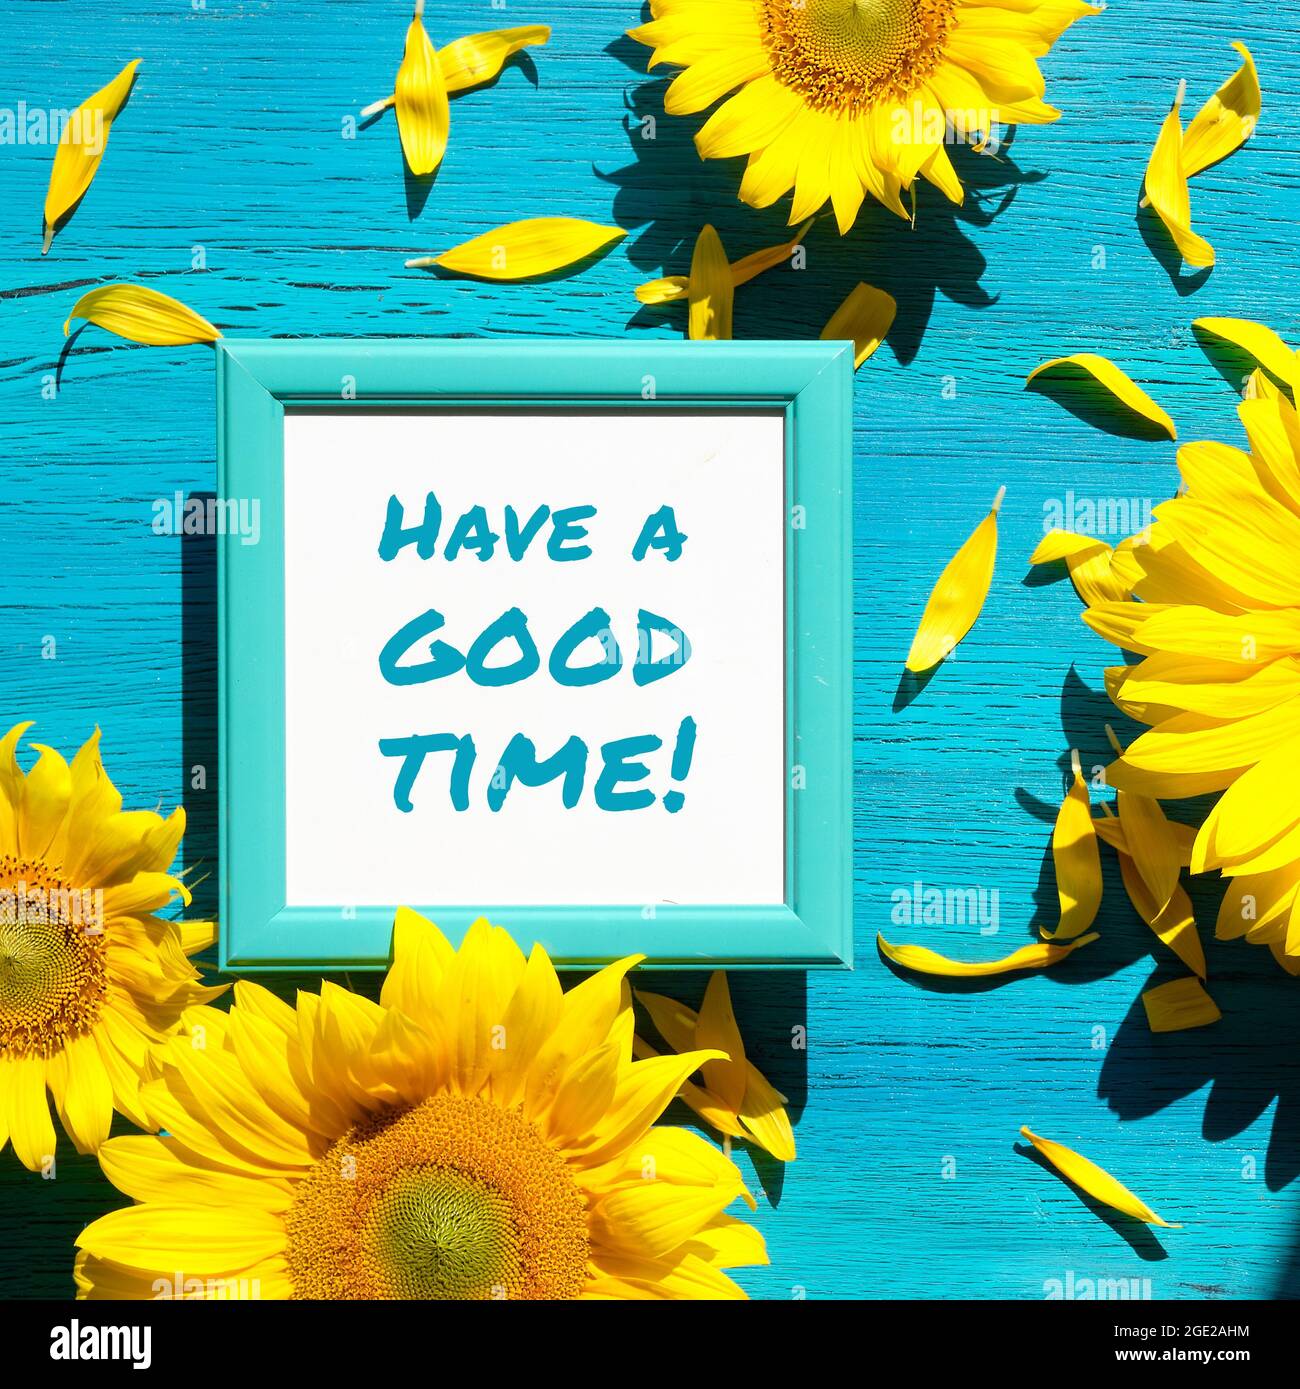 Text Have a Good Time in square white frame. Yellow sunflower flowers and petals scattered on vibrant textured turquoise wooden background. Bold Stock Photo